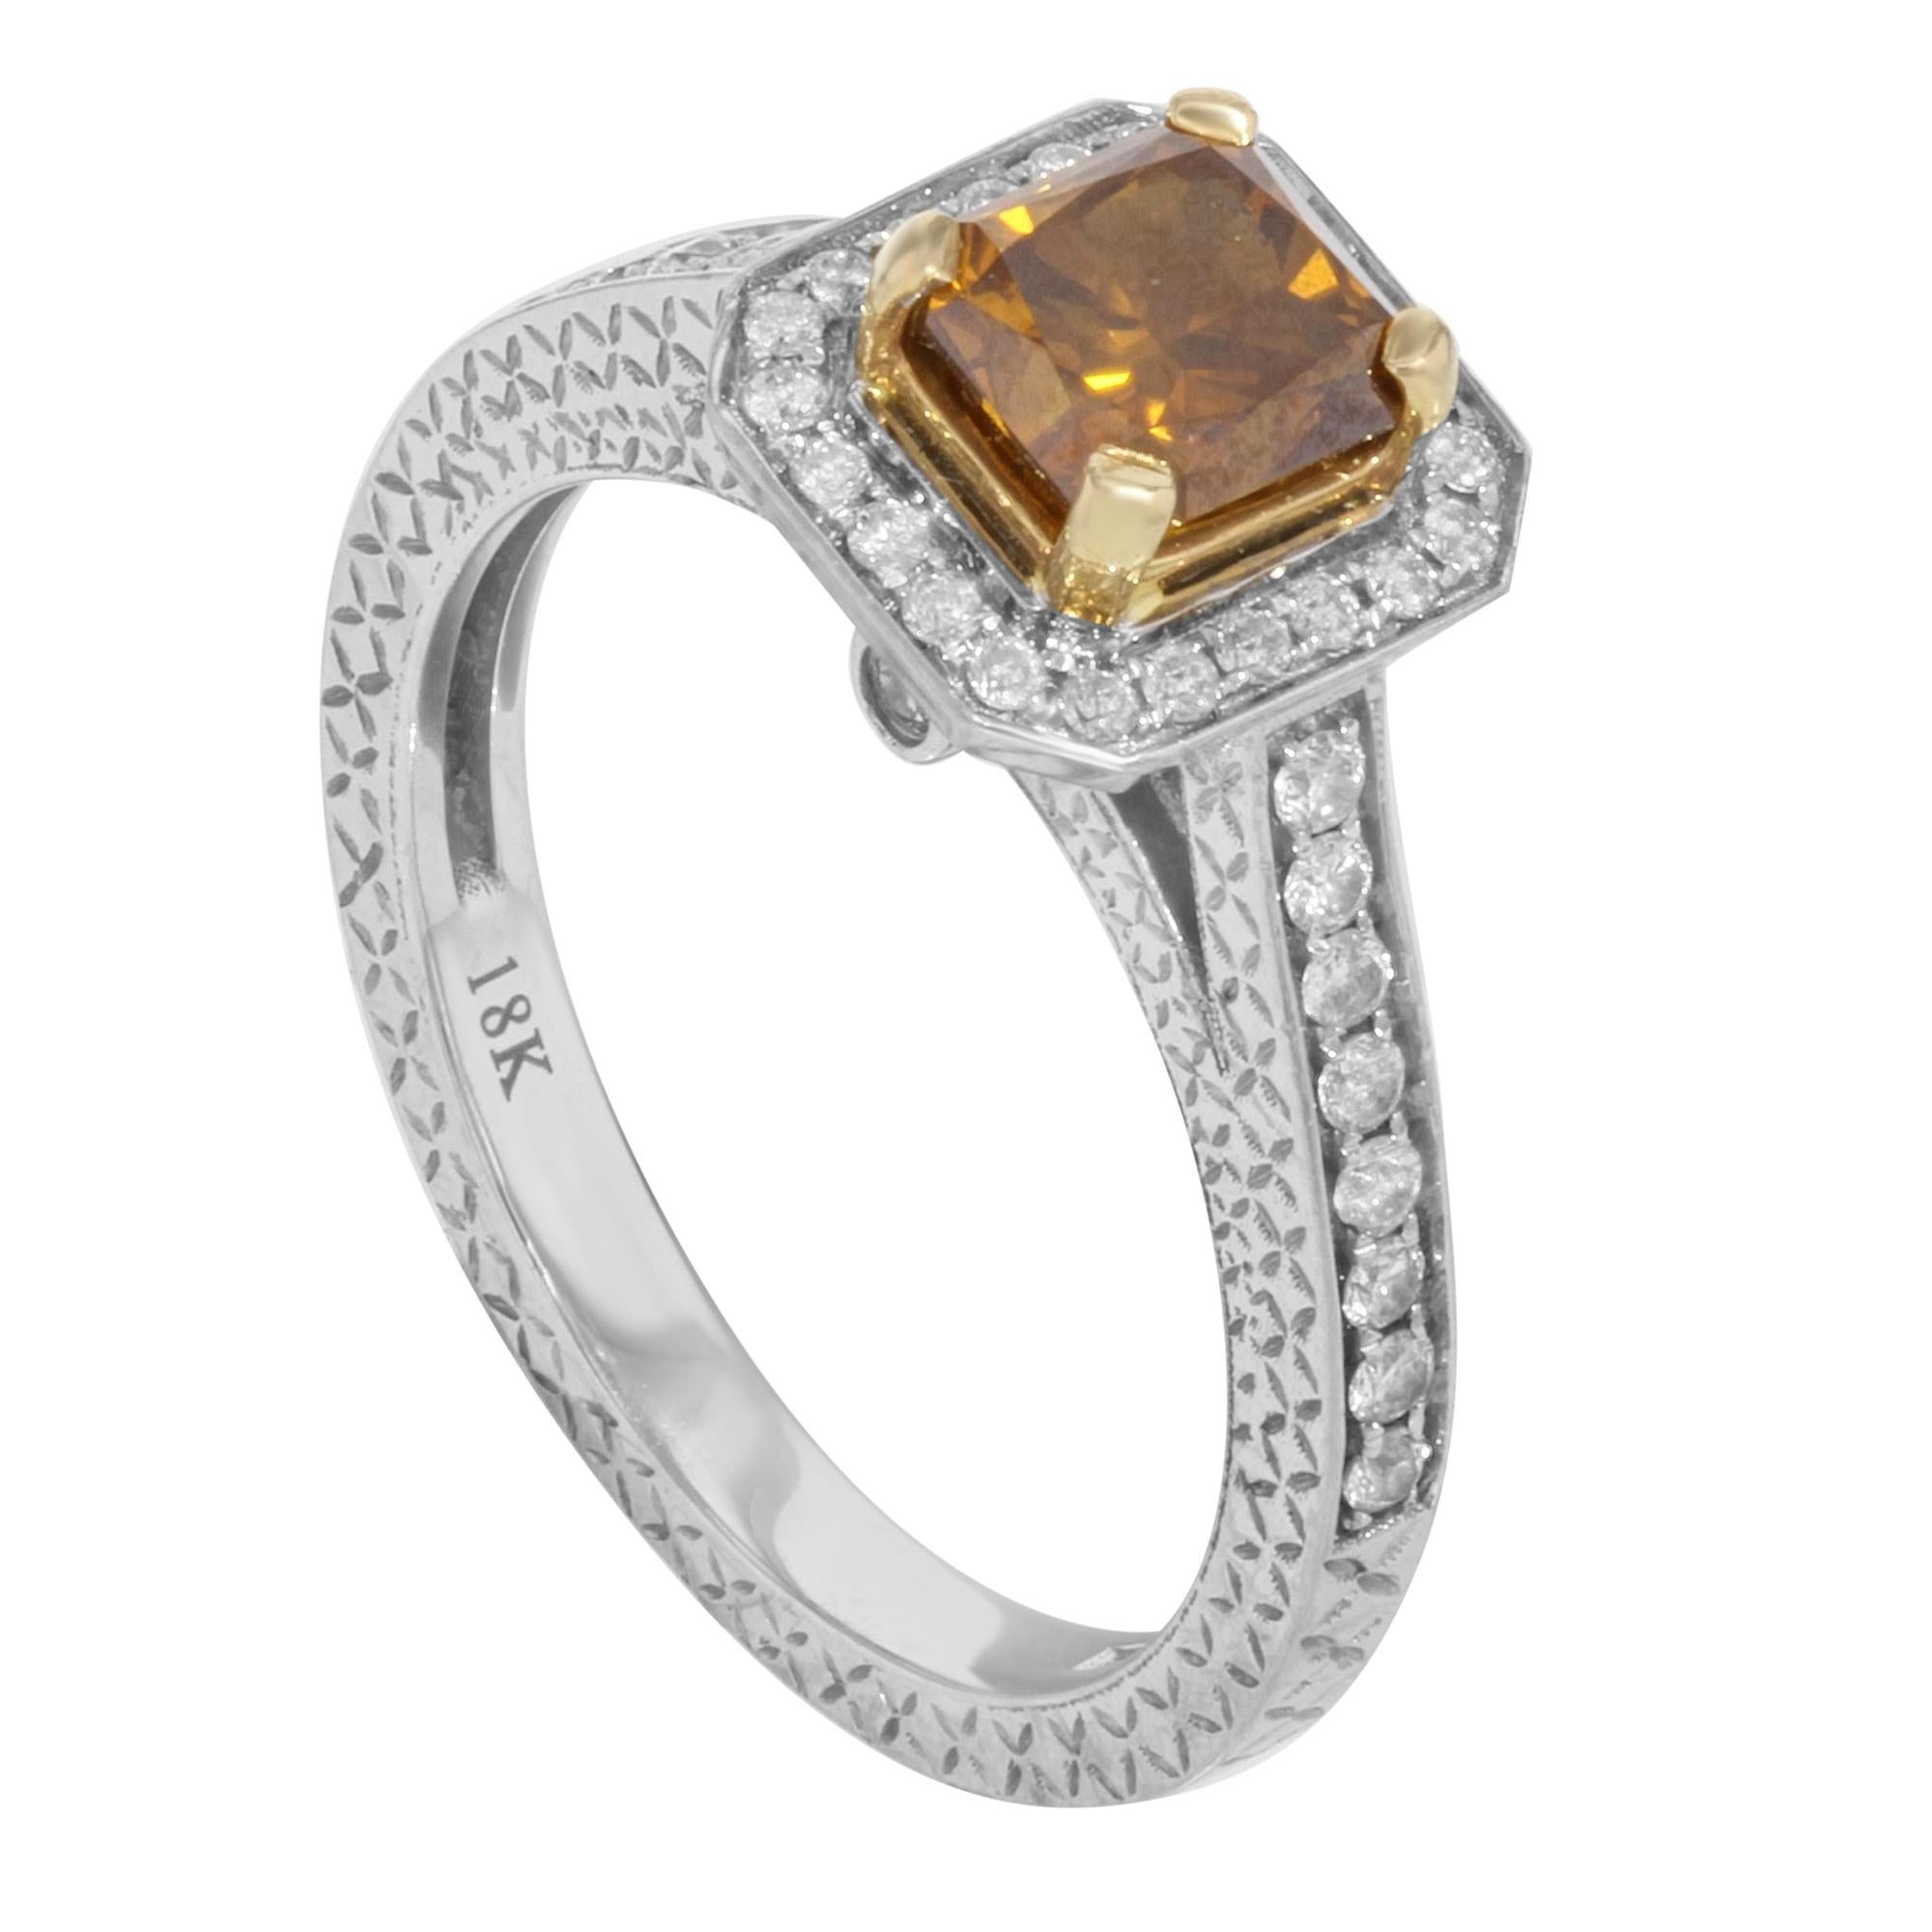 This beautiful diamond engagement ring is crafted in 18K white & yellow gold. It features a center prong set radiant cut color treated cognac diamond stone weighing approx. 1.00 carat with pave set round cut diamond accents weighing approx. 0.50ct.